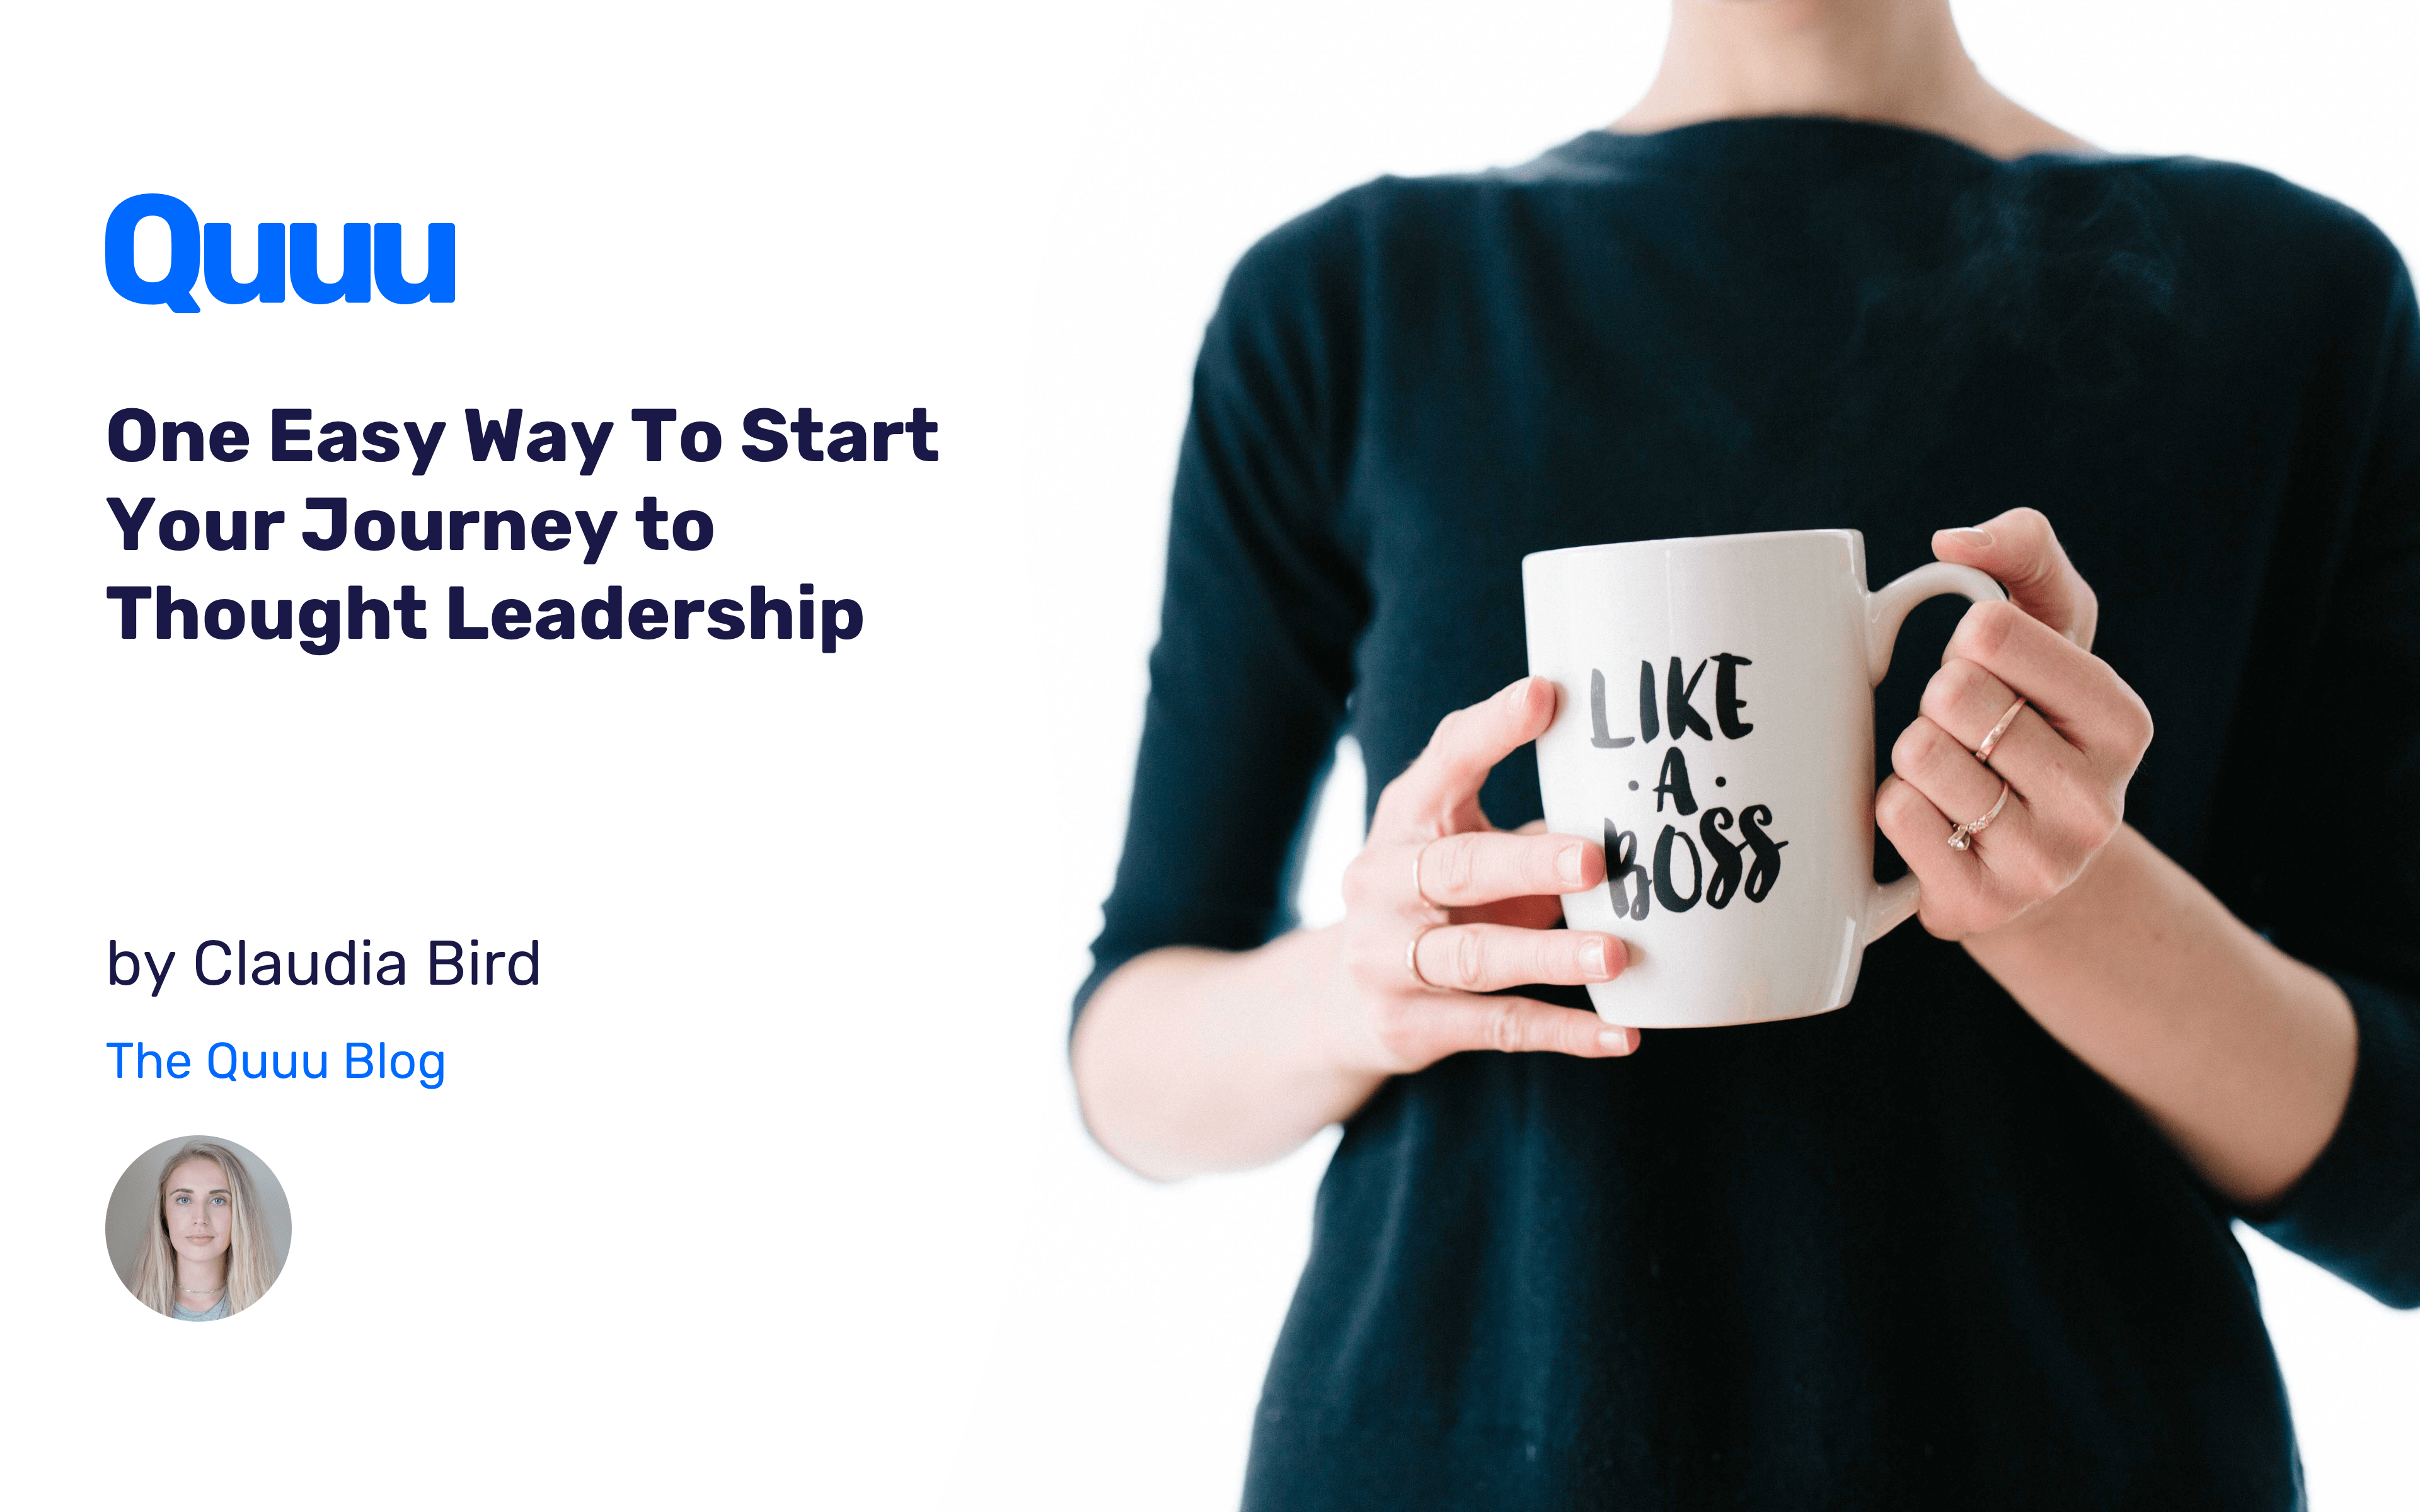 One Easy Way To Start Your Journey to Thought Leadership